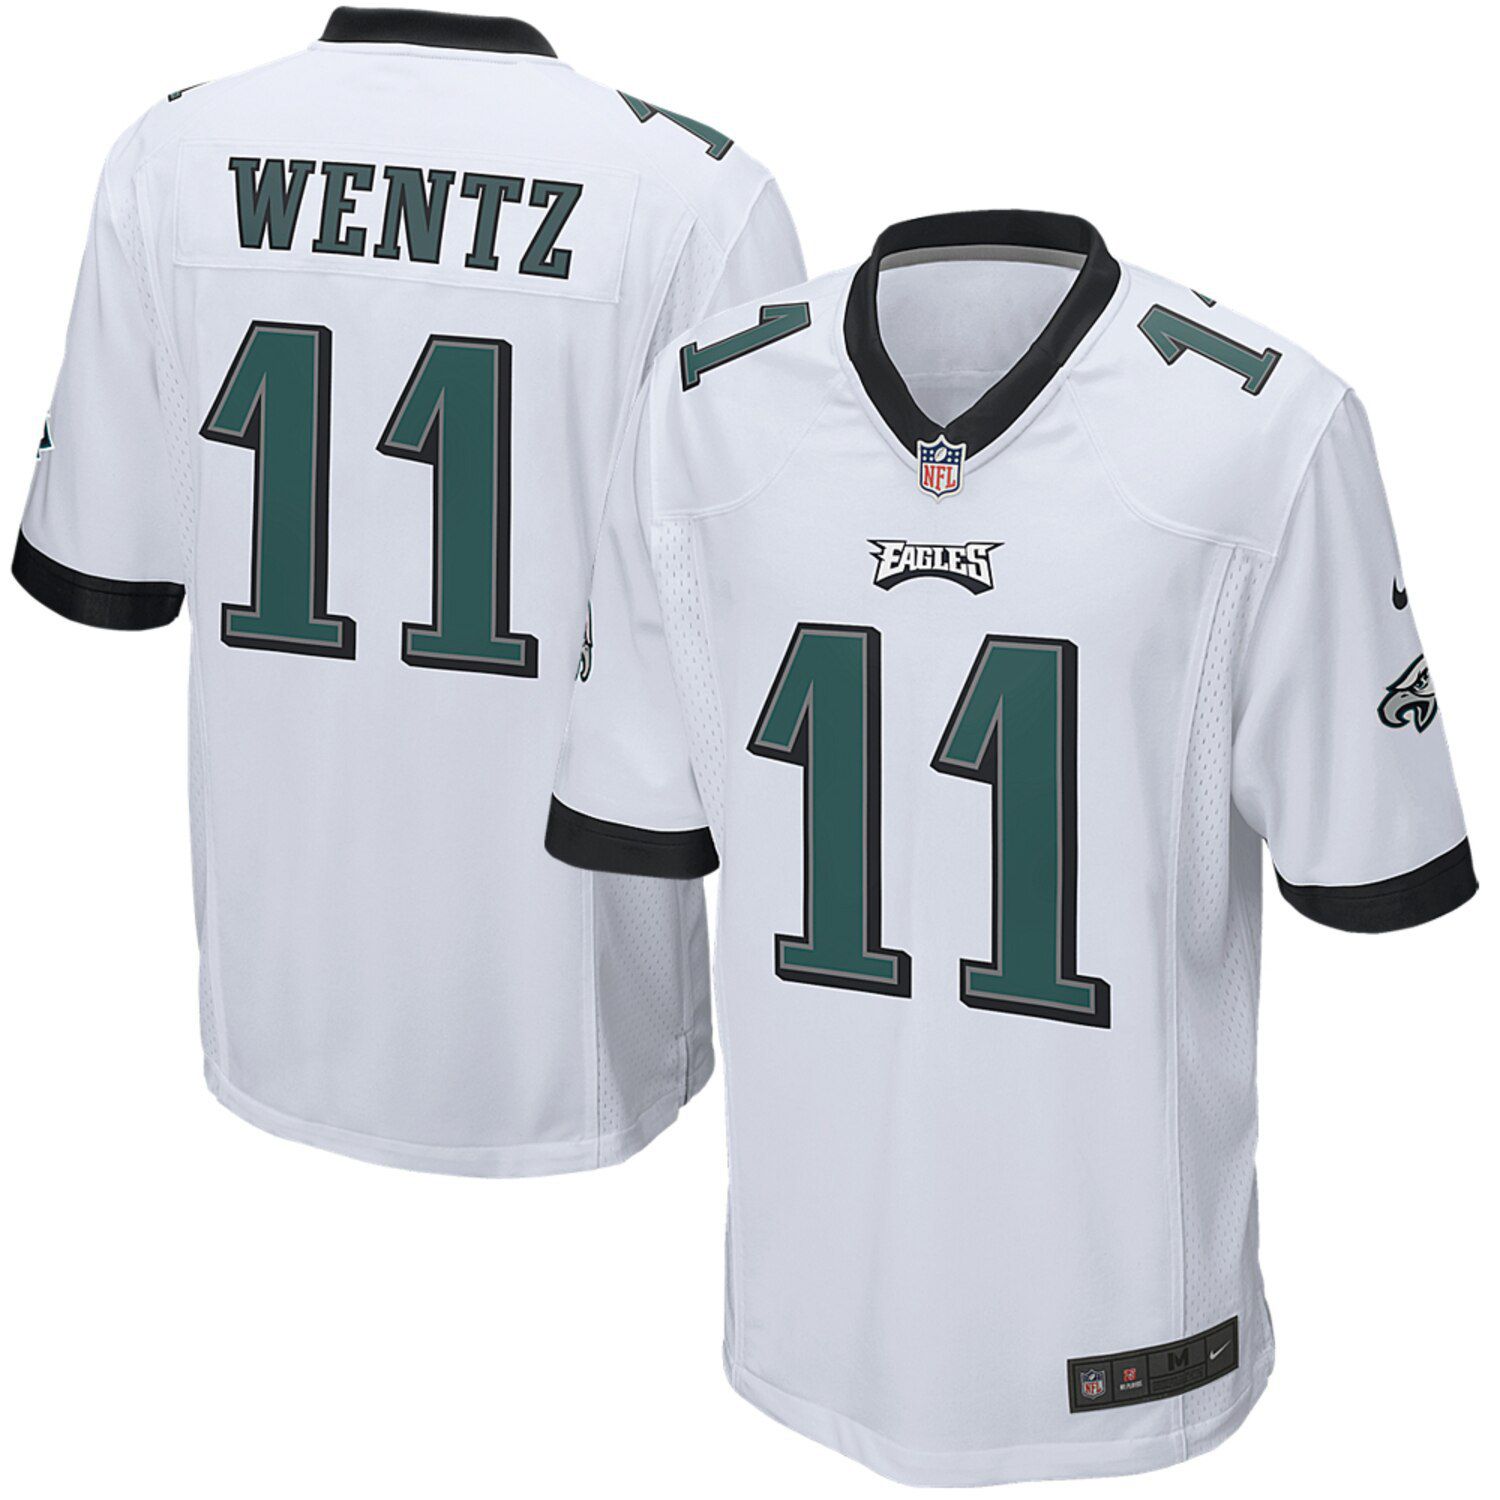 eagles youth jersey